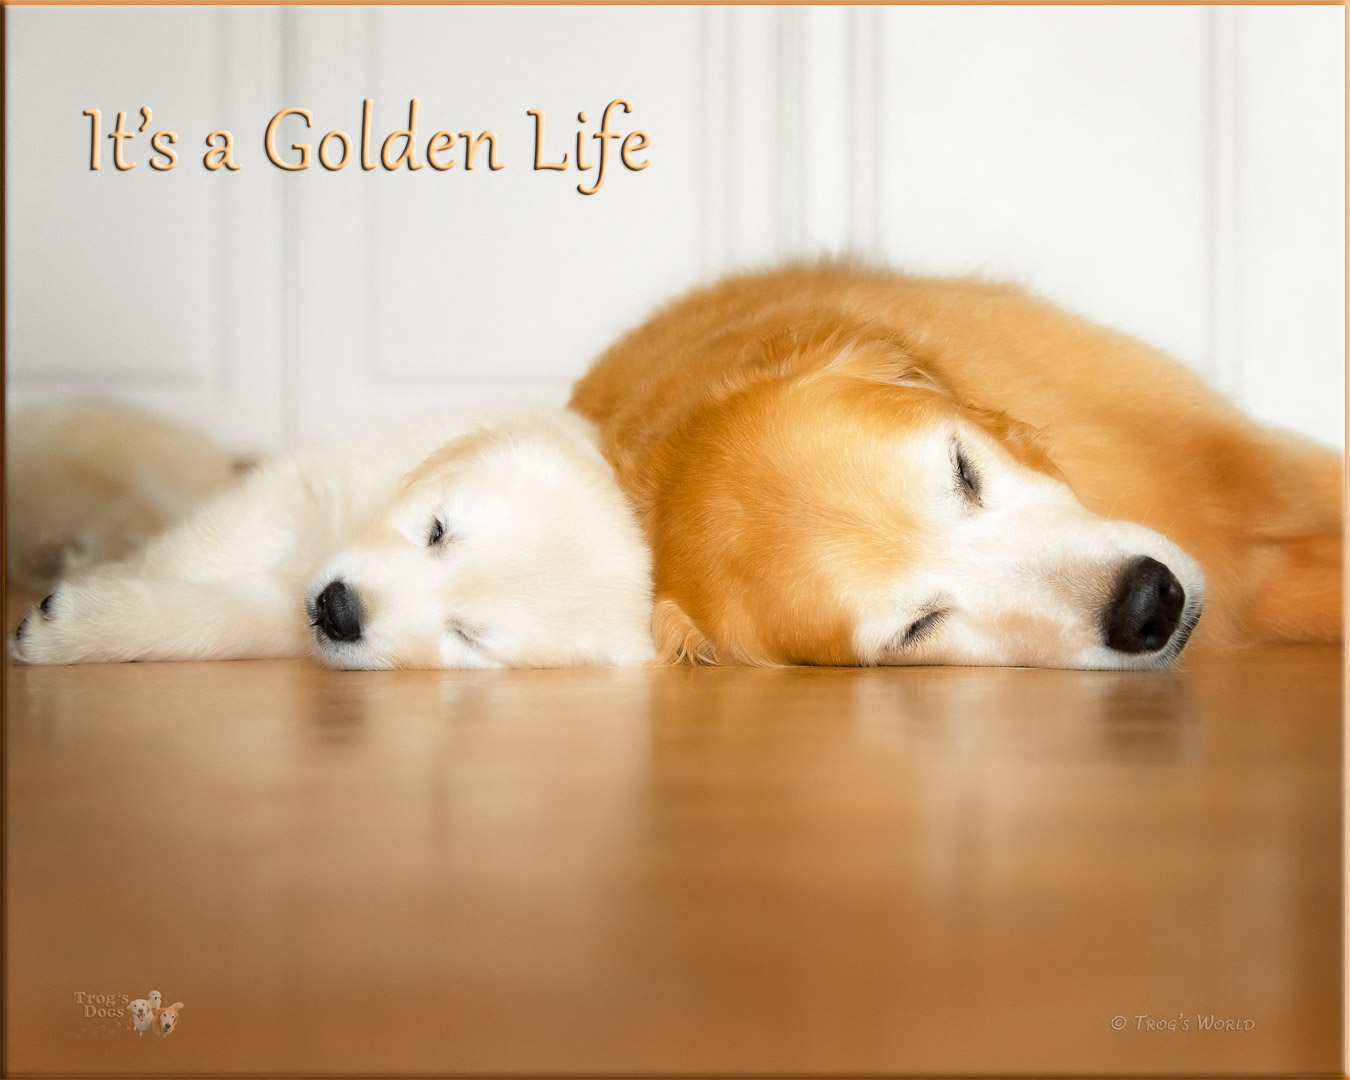 Golden Retriever puppy napping with her sister